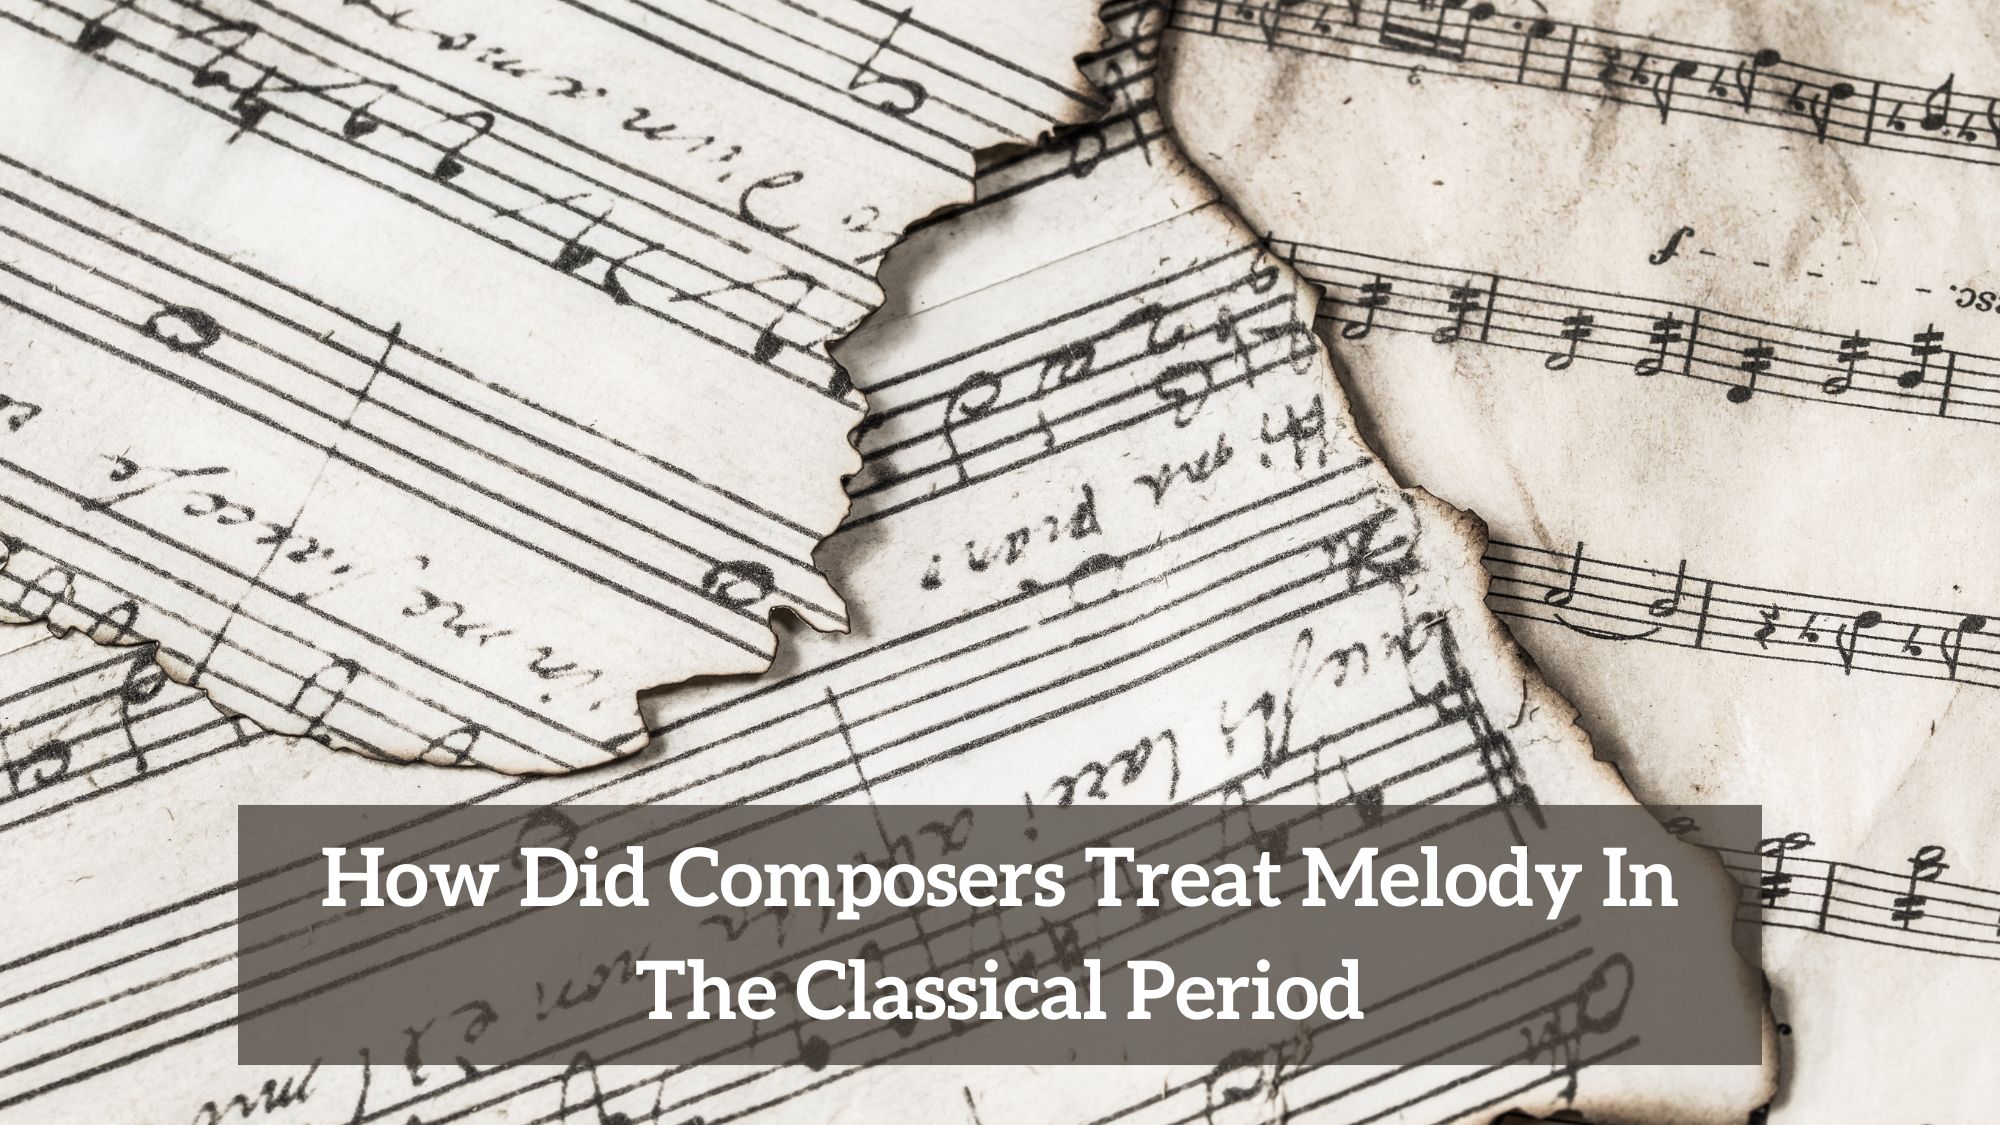 How Did Composers Treat Melody In The Classical Period